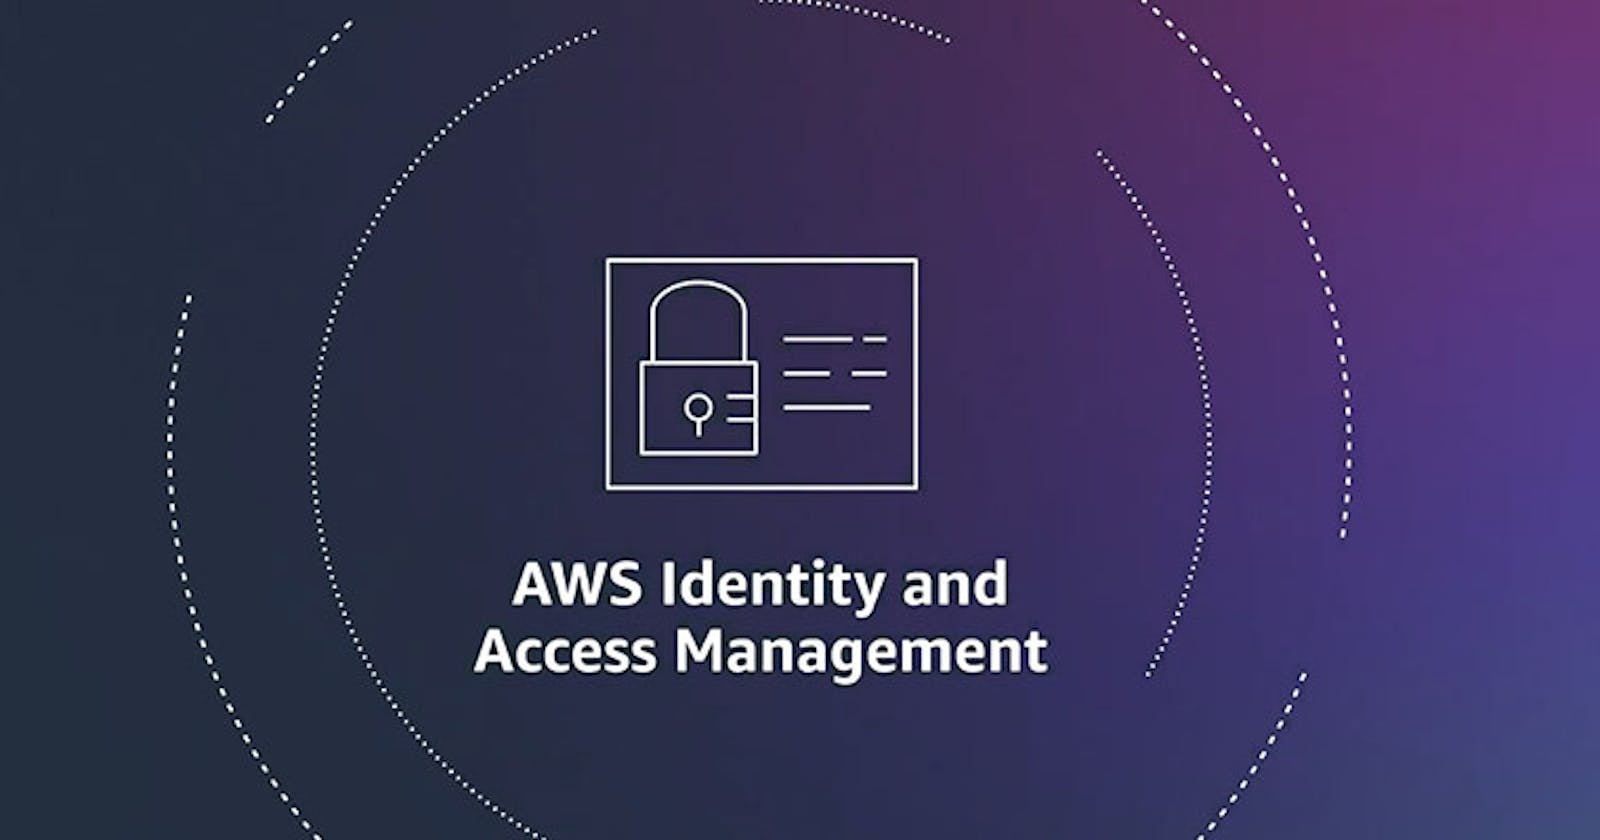 Understanding AWS Identity and Access Management (IAM)